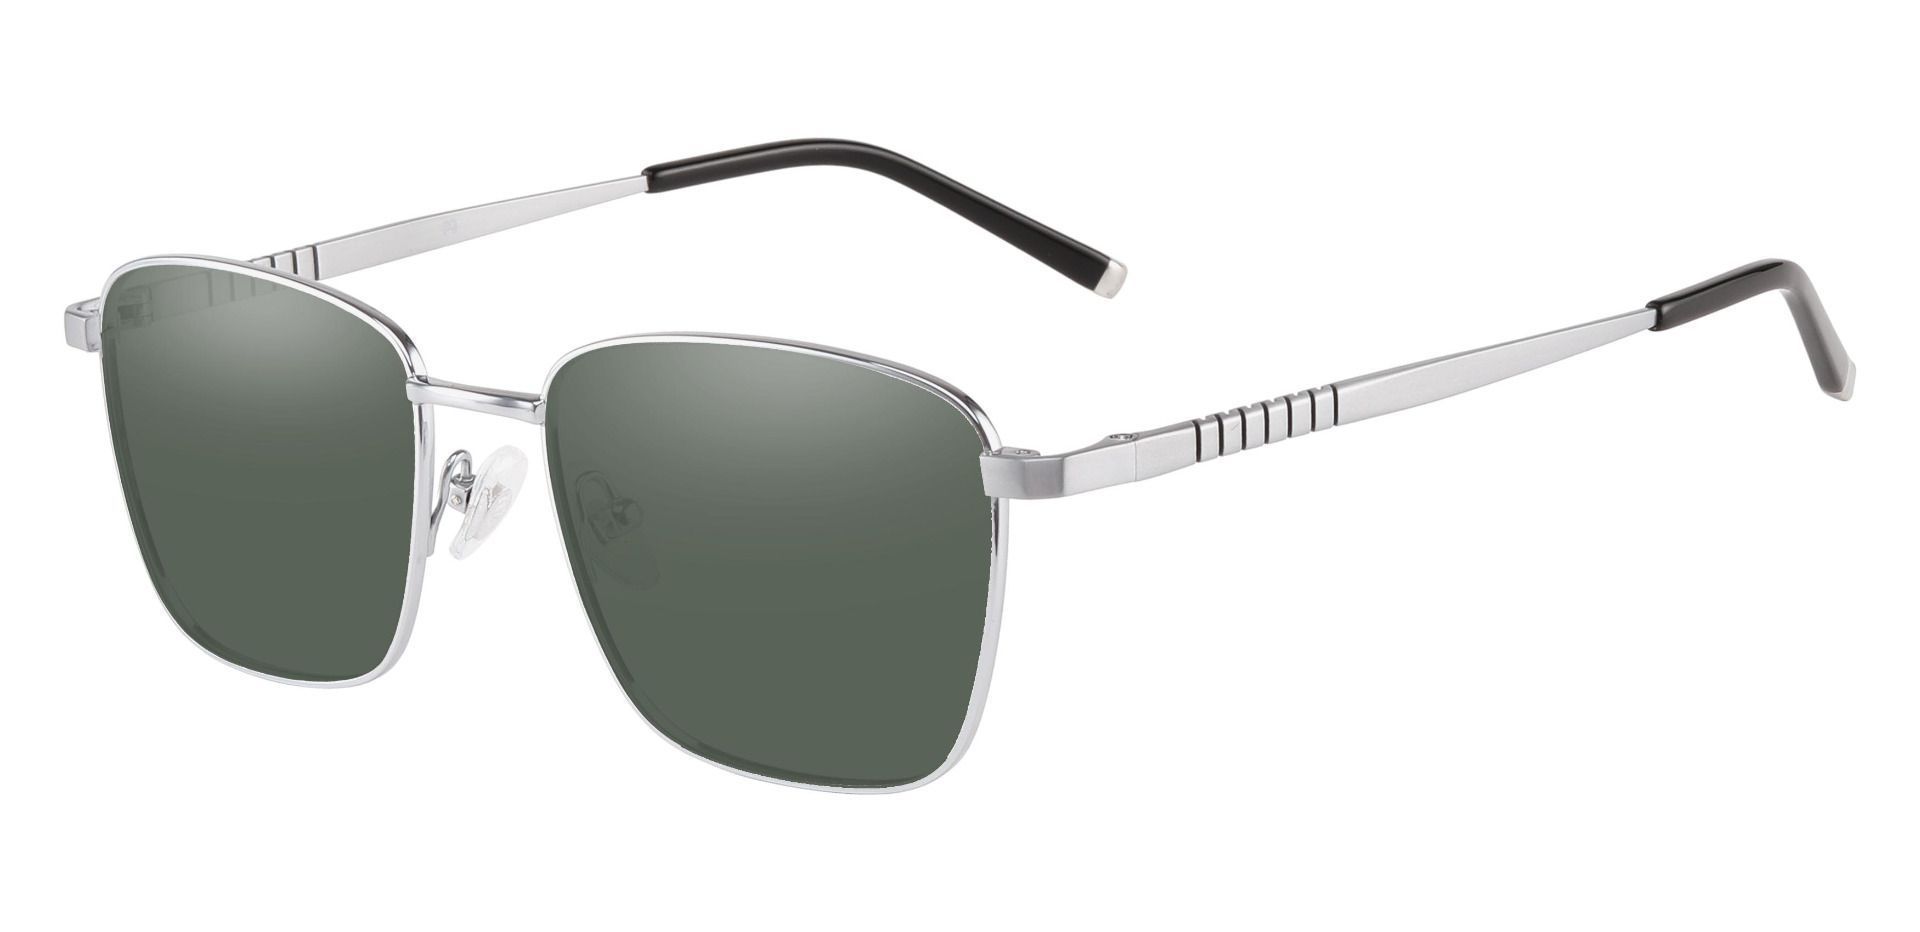 May Square Lined Bifocal Sunglasses - Silver Frame With Green Lenses